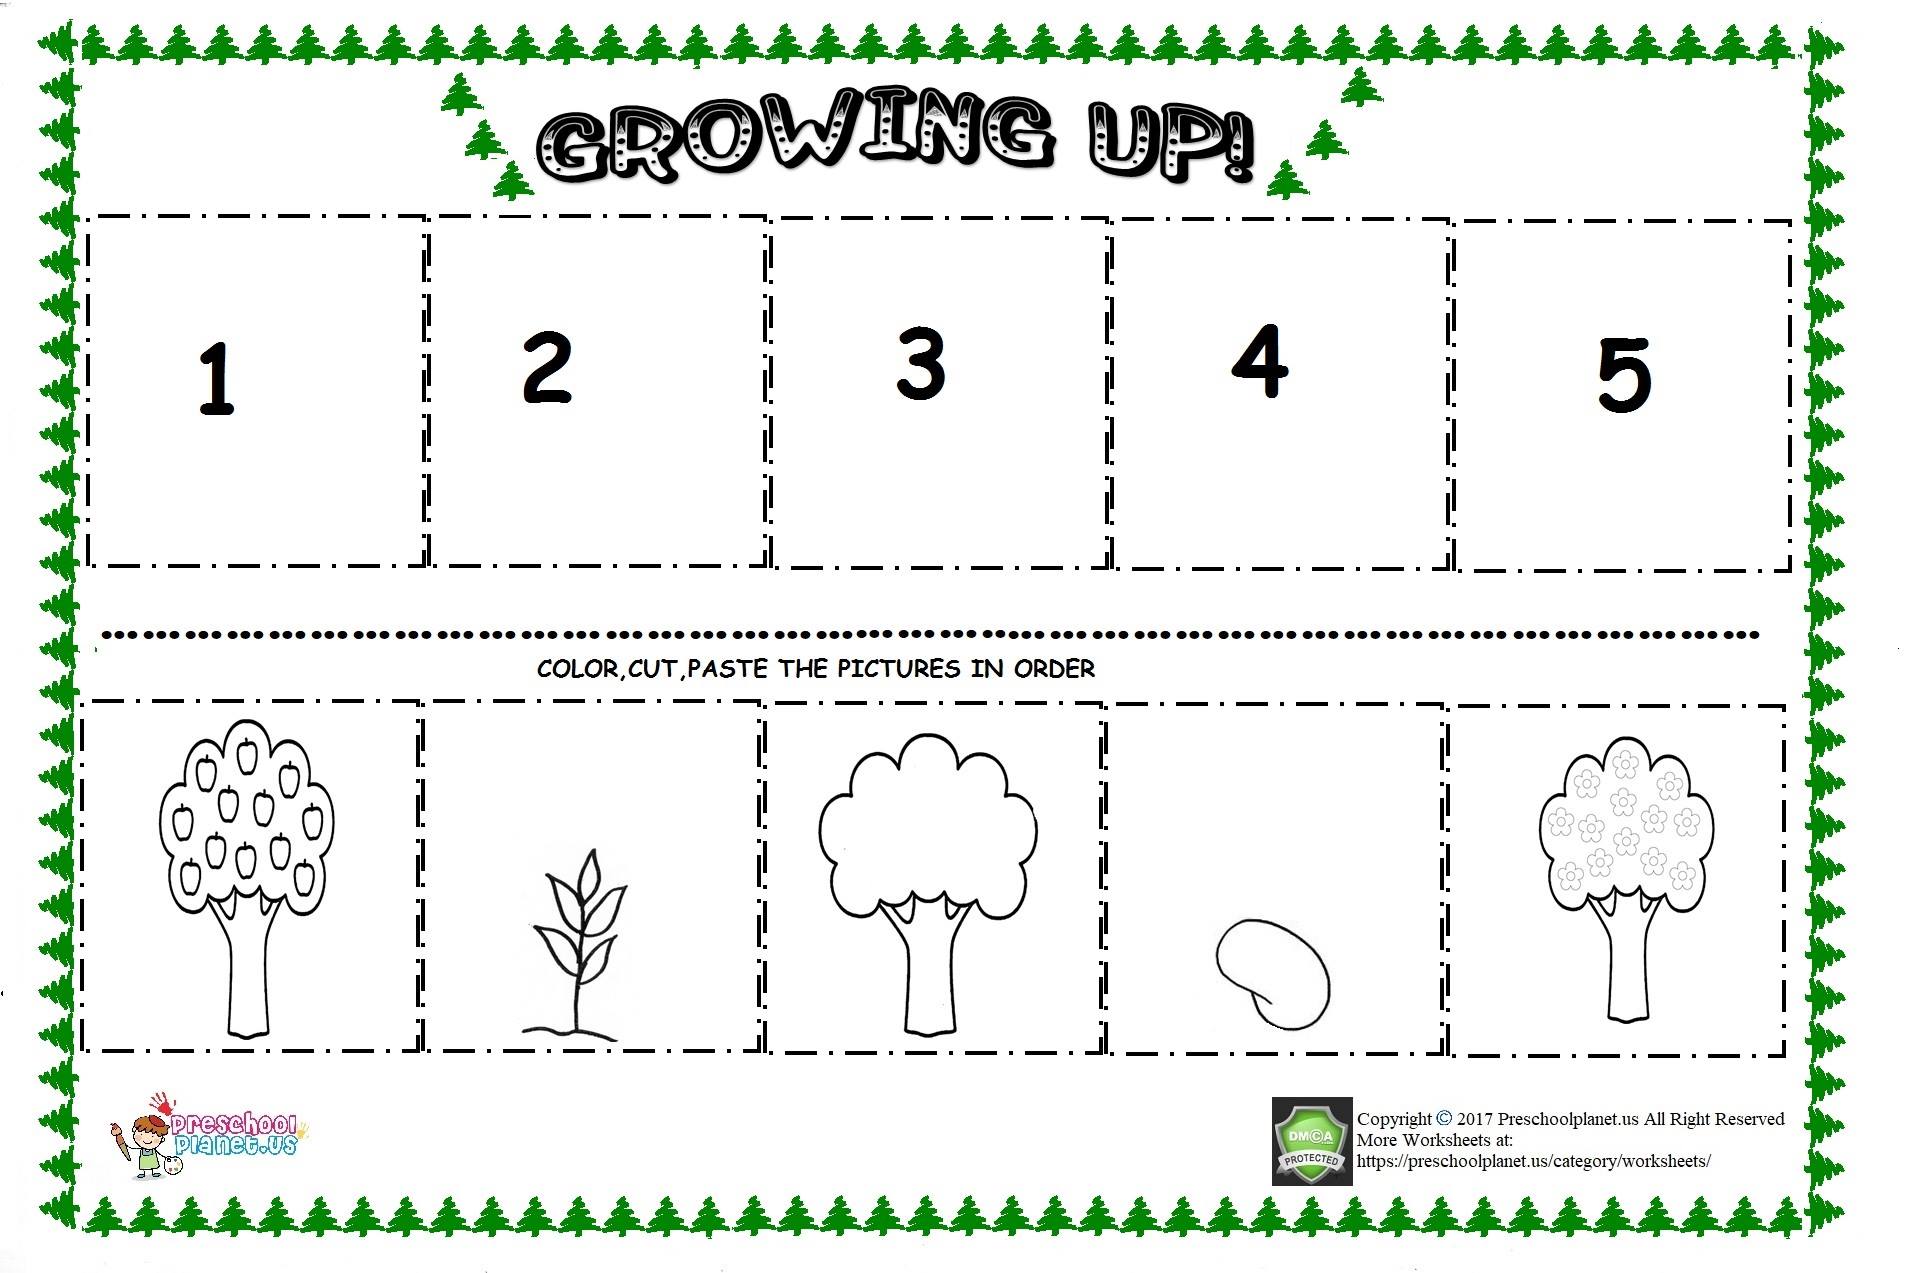 apple tree life cycle sequencing sheets